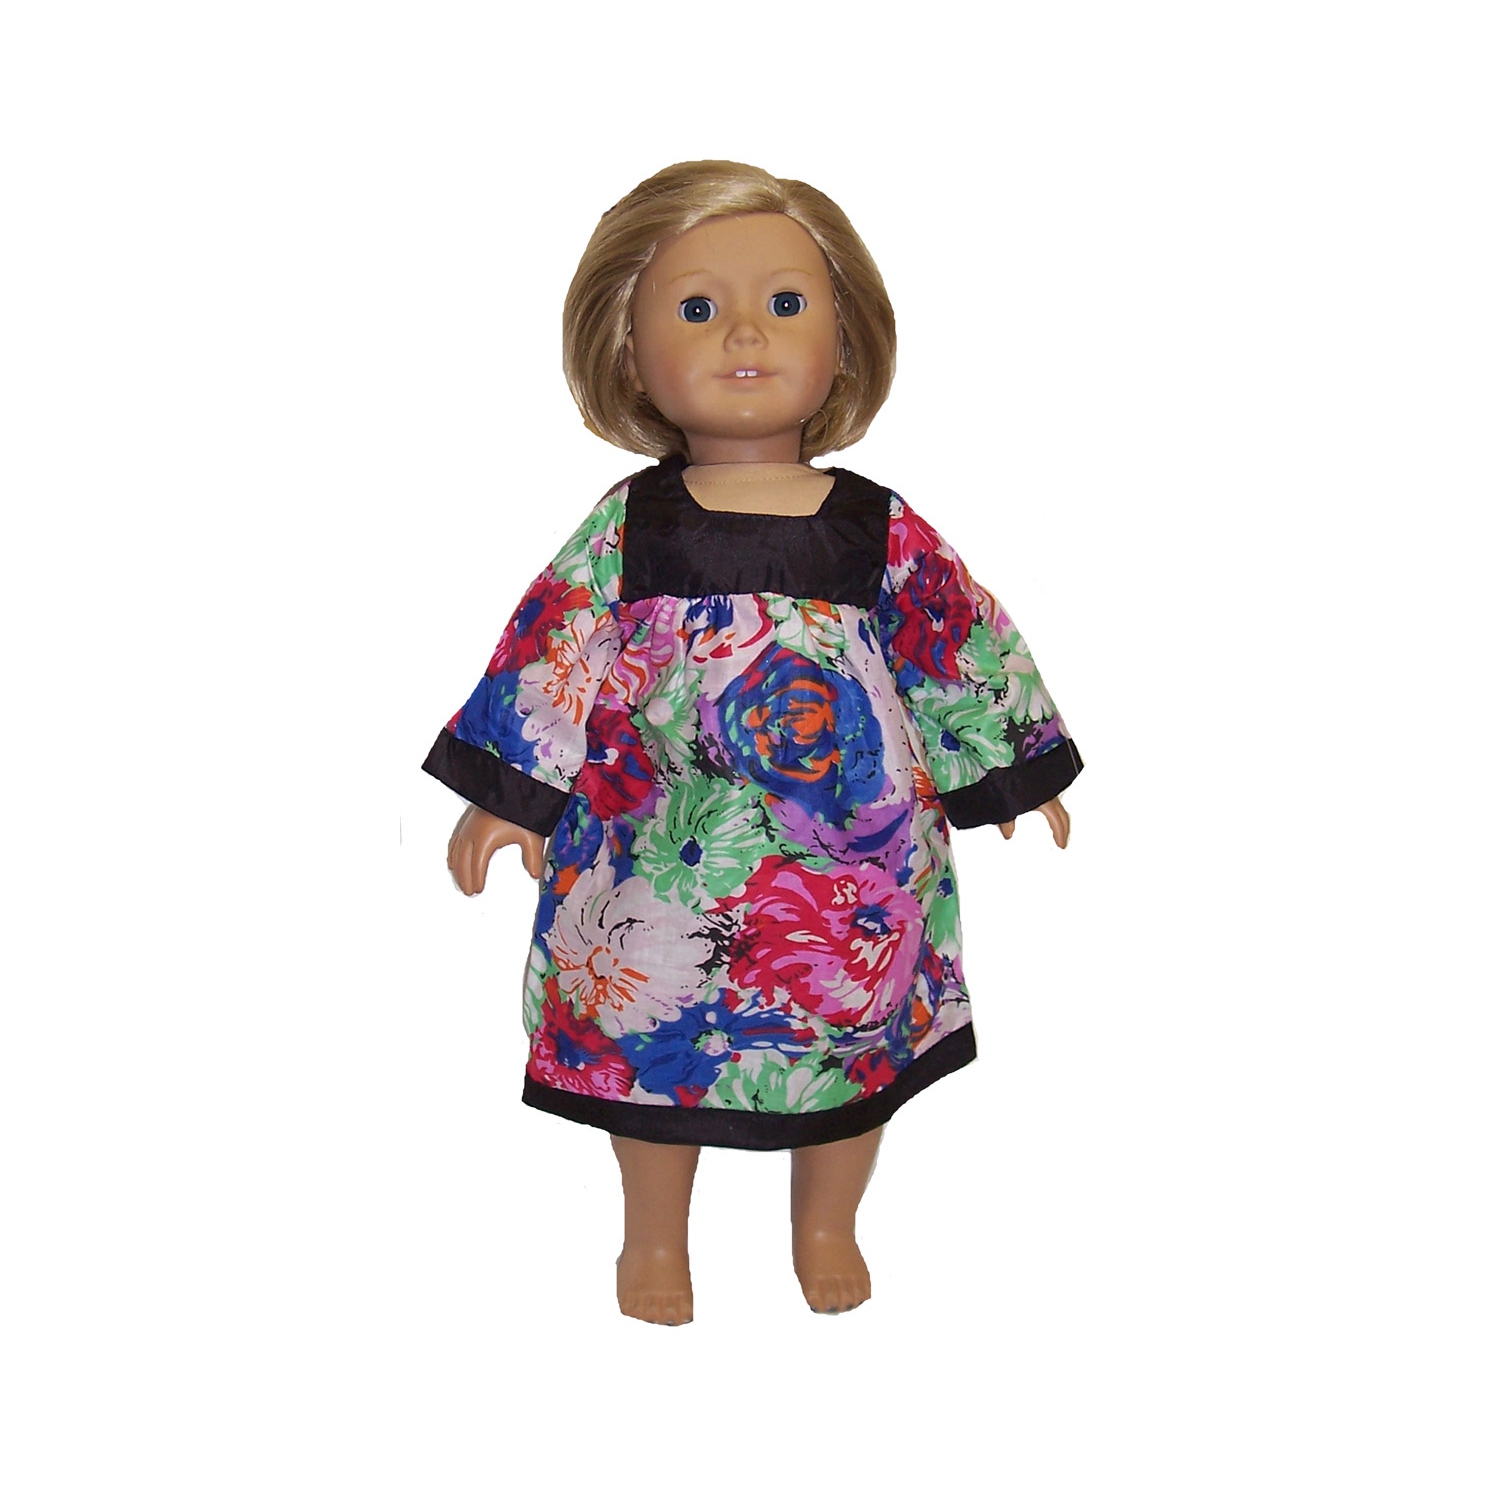 Doll Clothes Superstore Muumuu Style Nightgown Fits 18 Inch Dolls Like American Girl Our Generation My Life Dolls